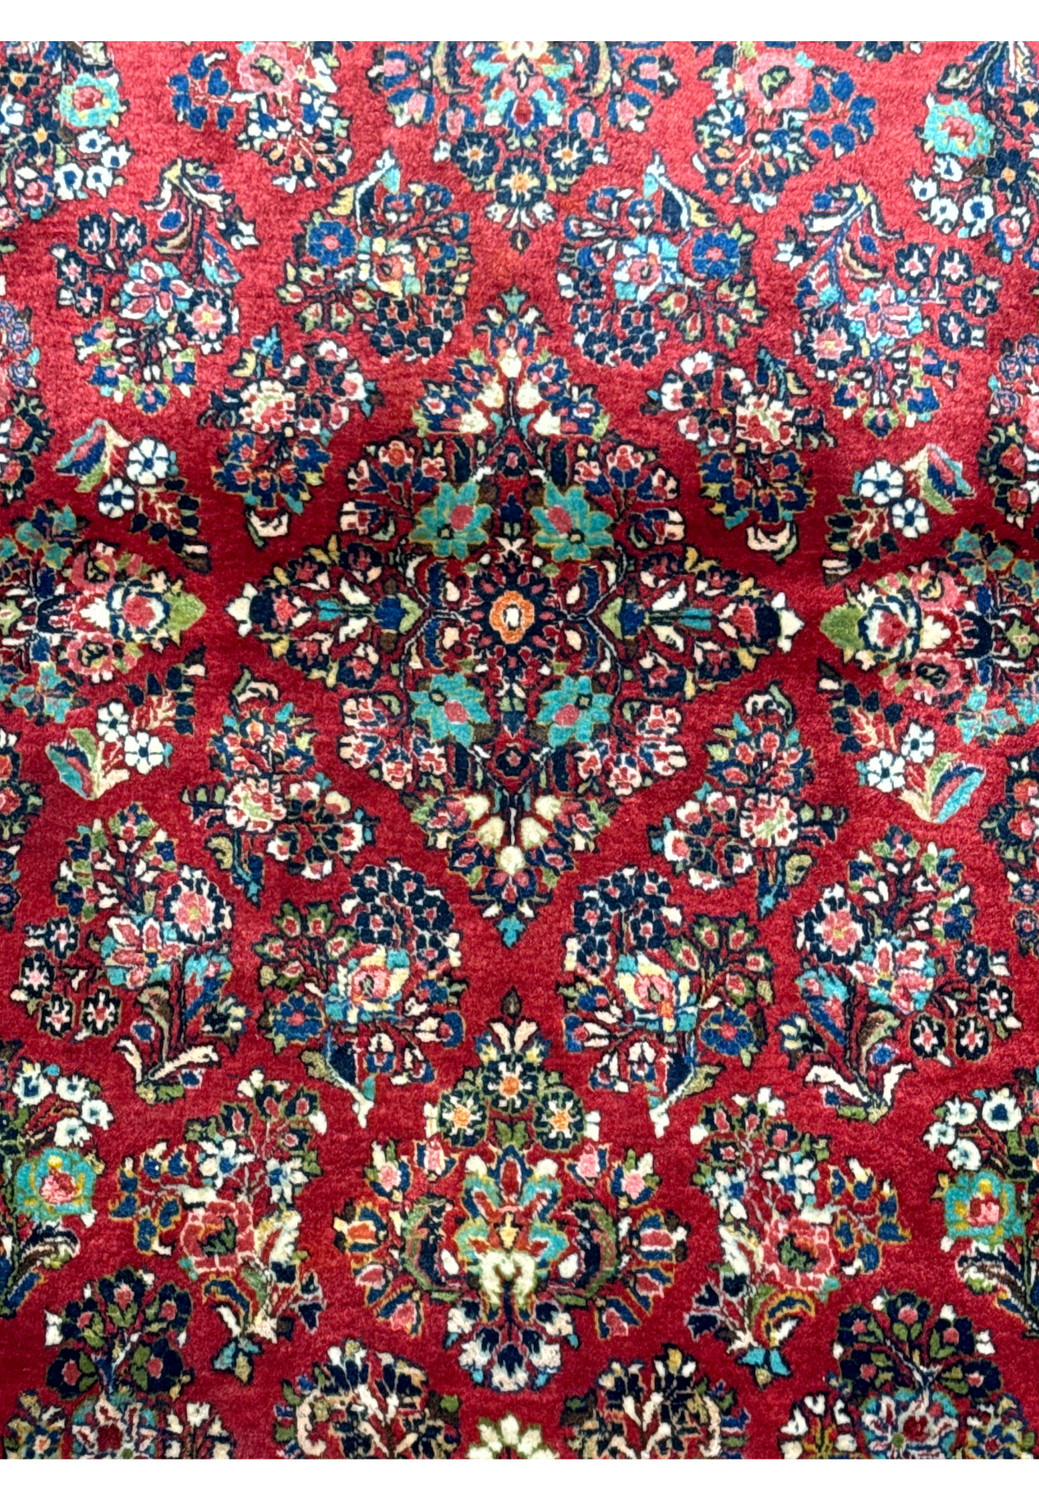 Close-up of the Persian Sarough rug's detailed weaving, highlighting the vibrant colors and traditional patterns